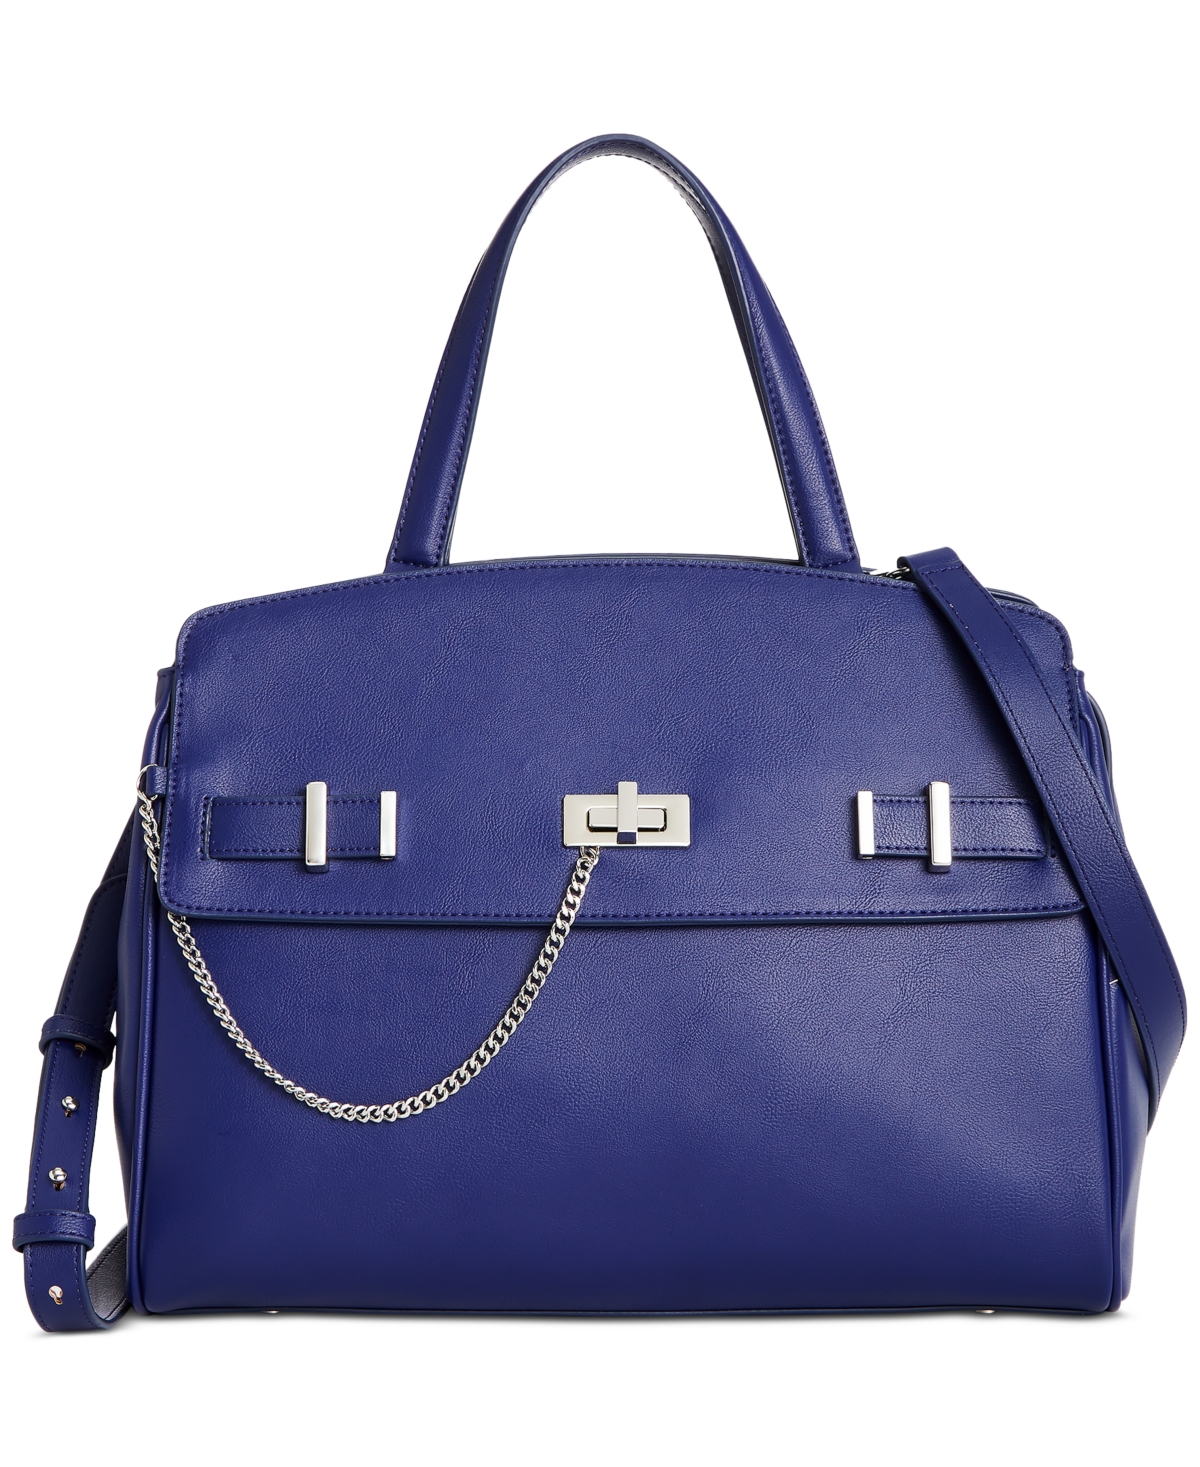 Inc International Concepts Emiliee Medium Satchel, Created For Macy's In Sapphire Crush